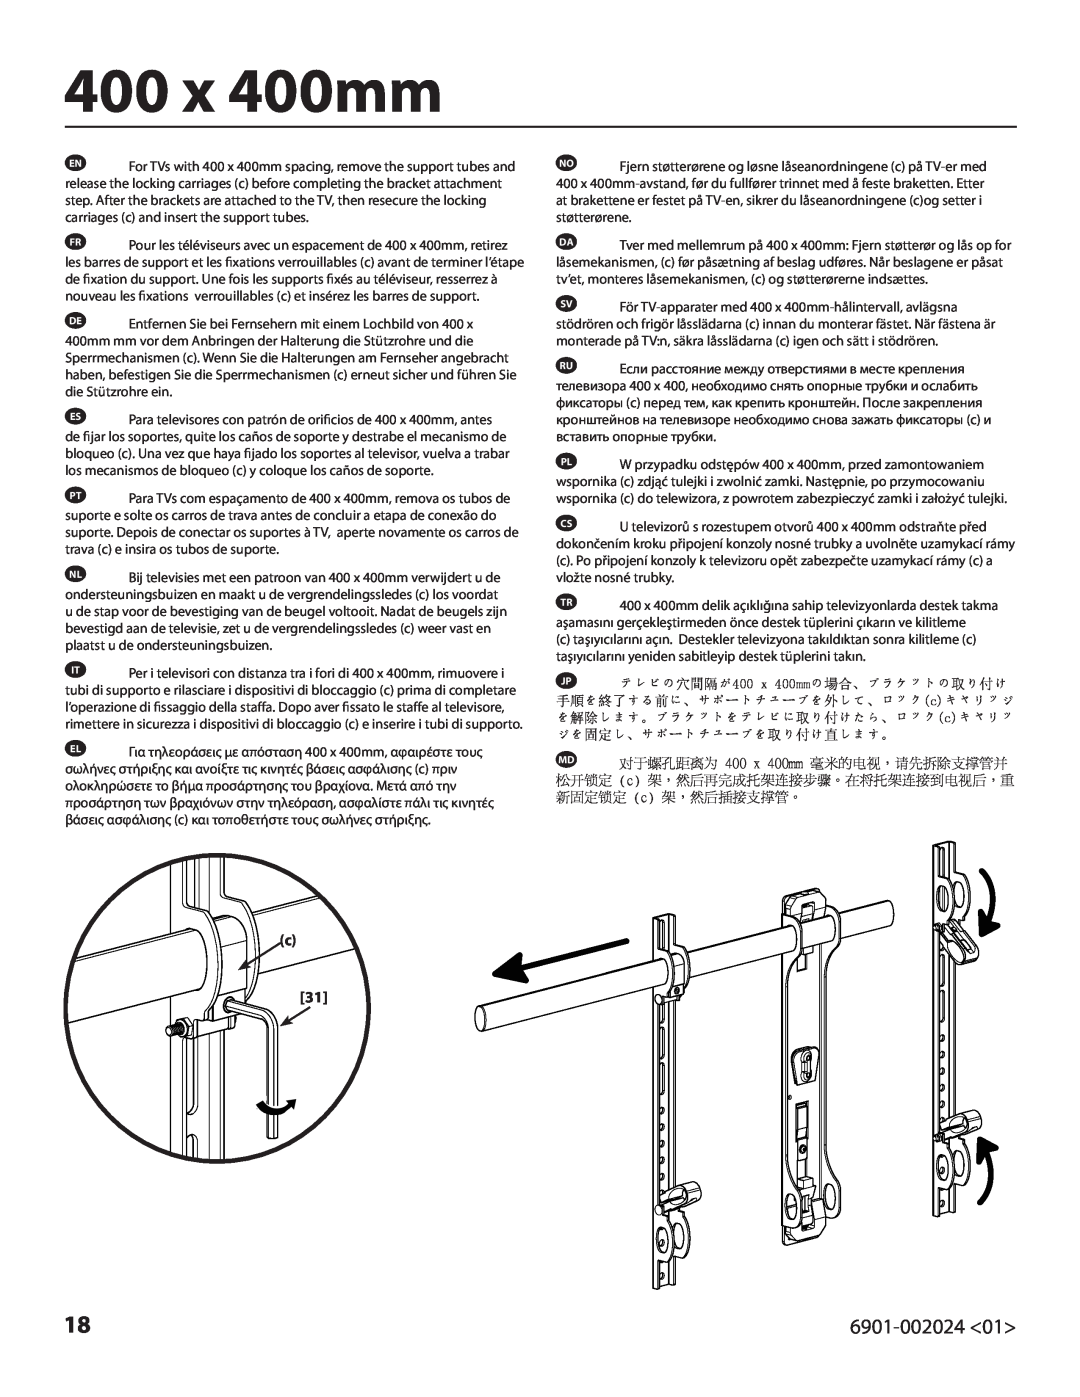 Sanus Systems VLF210 important safety instructions 400 x 400mm, 6901-002024<01>, c 31 